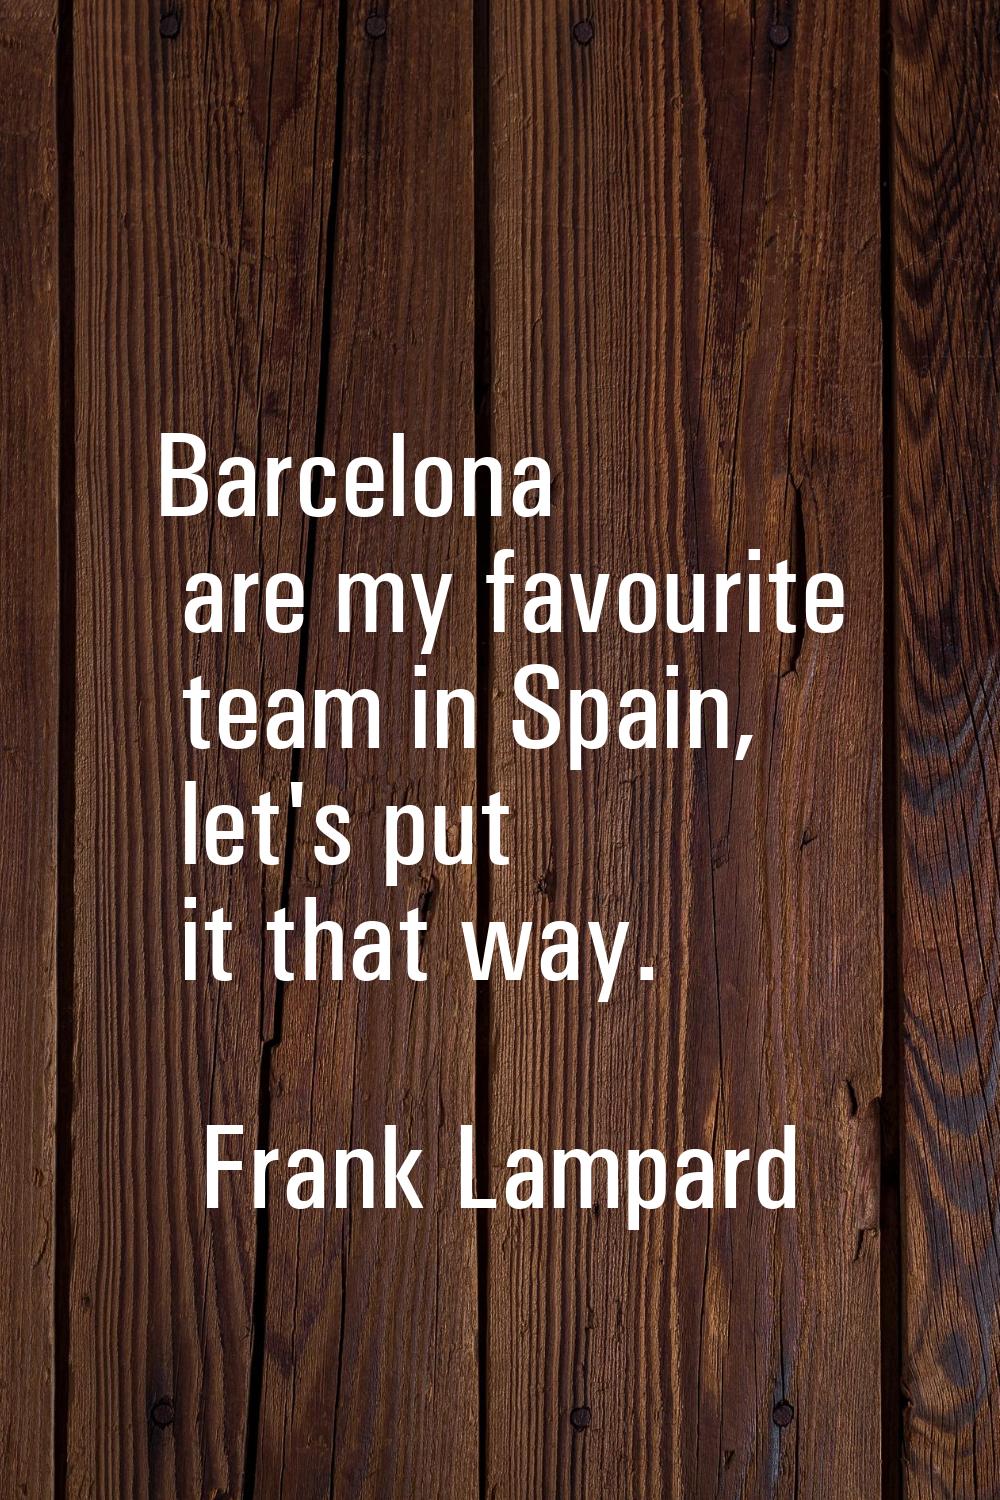 Barcelona are my favourite team in Spain, let's put it that way.